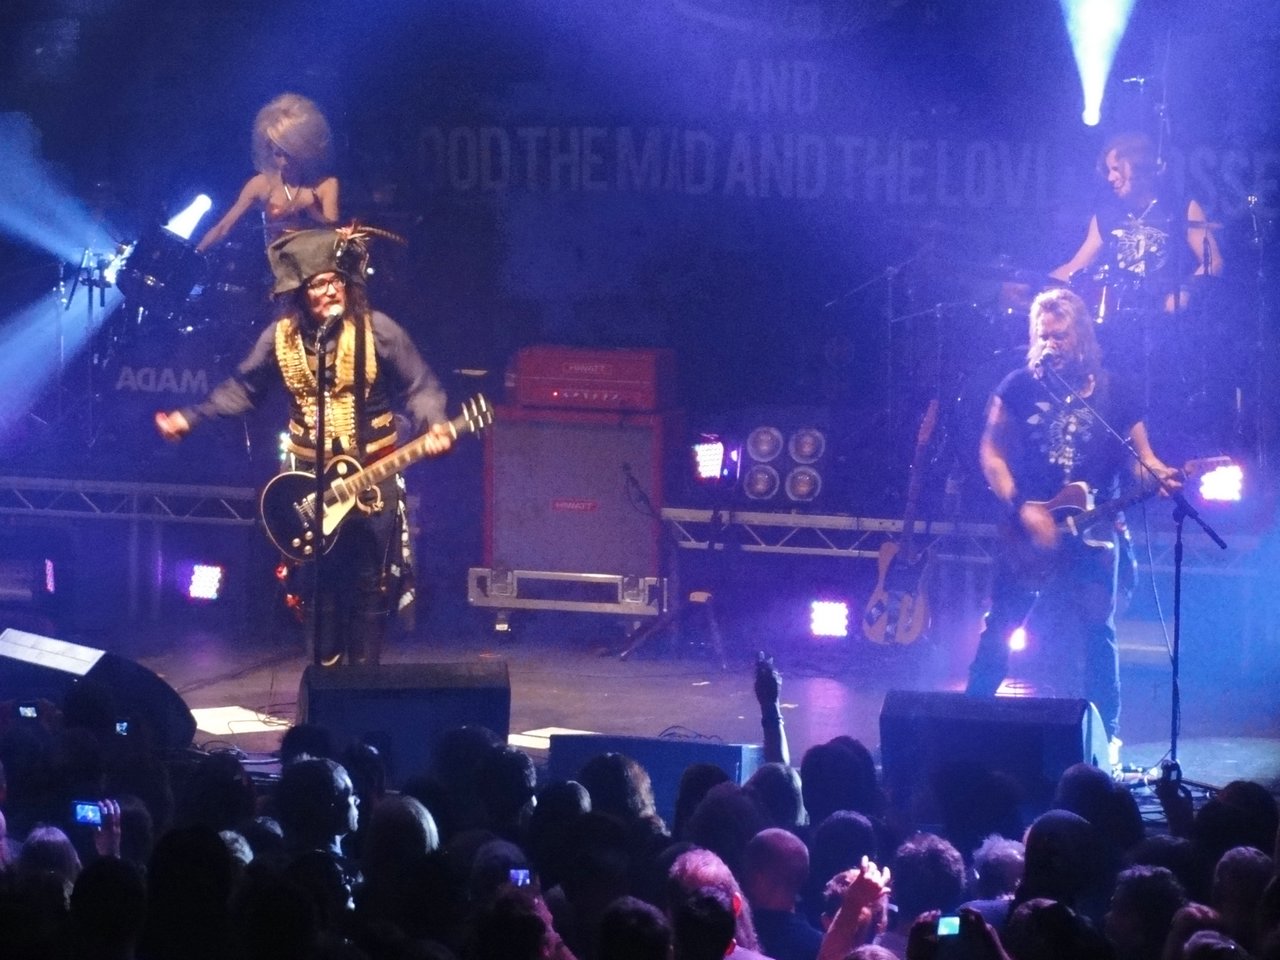 11 Adam Ant at the Roundhouse.jpg